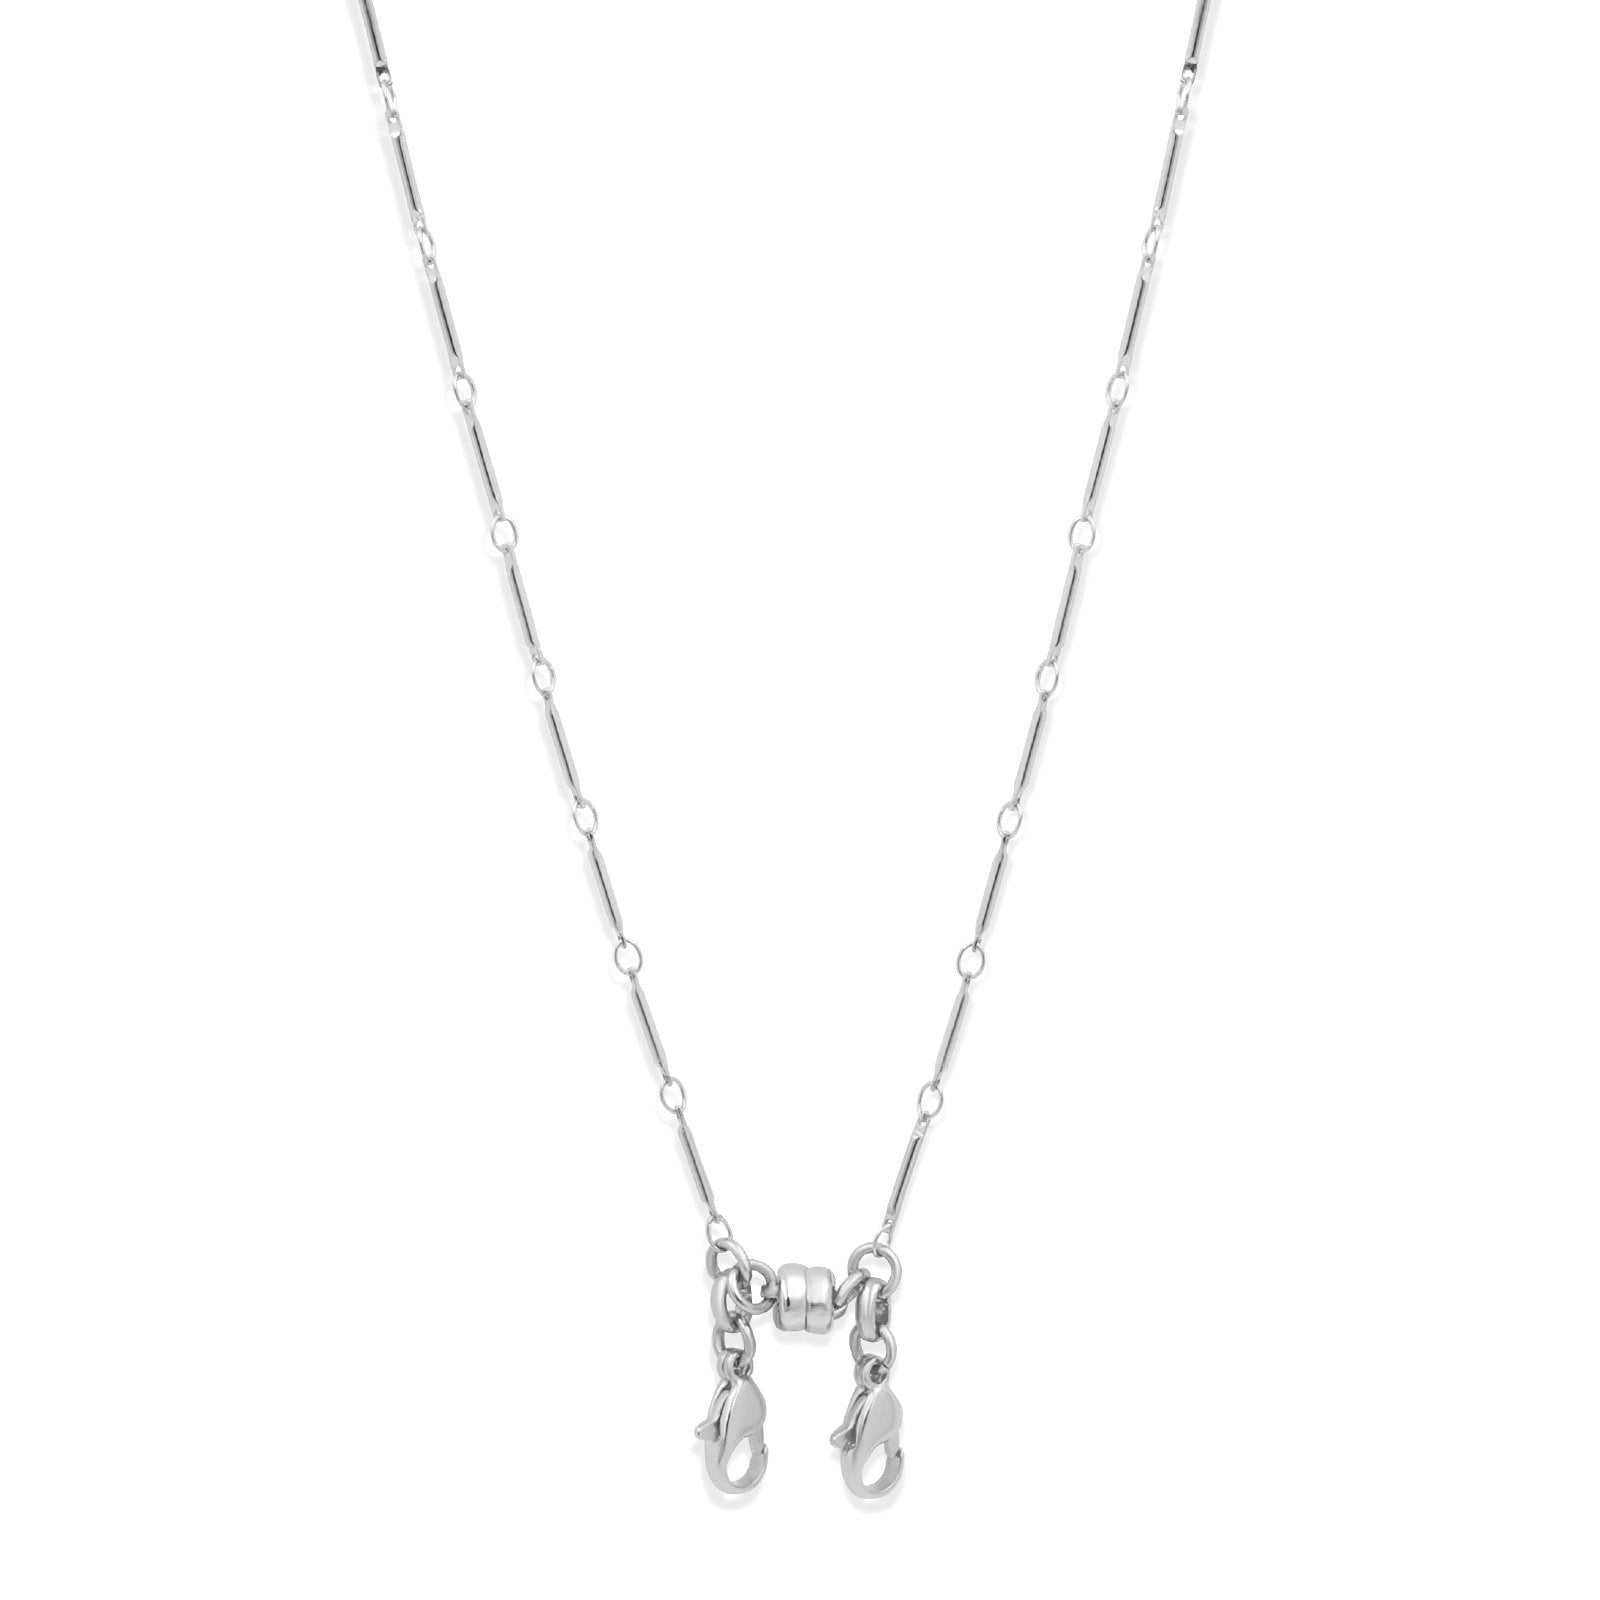 Convertible Station Chain Necklace For Eyewear - Camille Jewelry